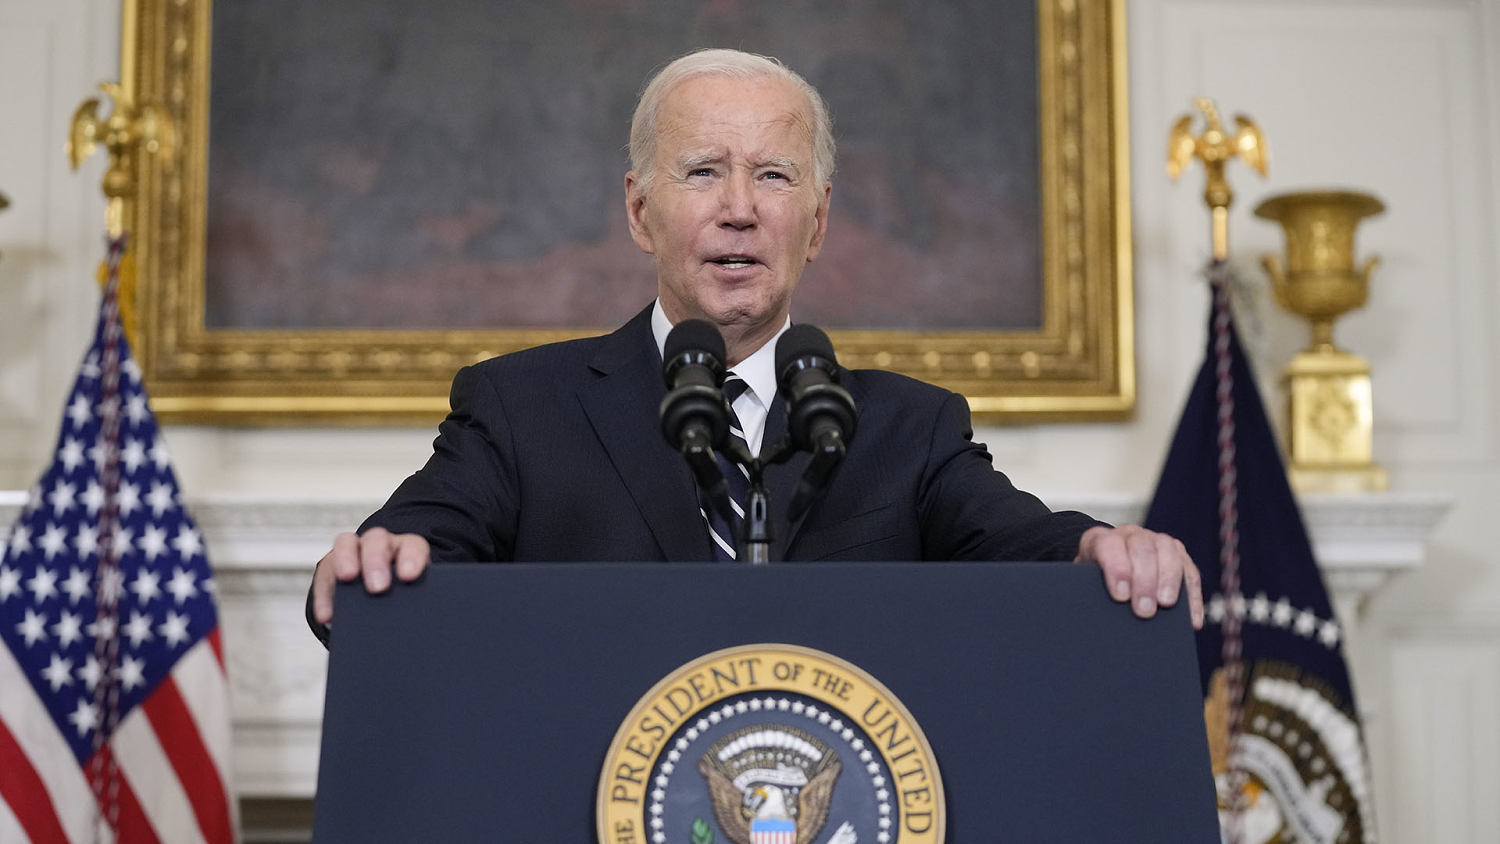 Biden delivers remarks at the National Peace Officers' Memorial Service